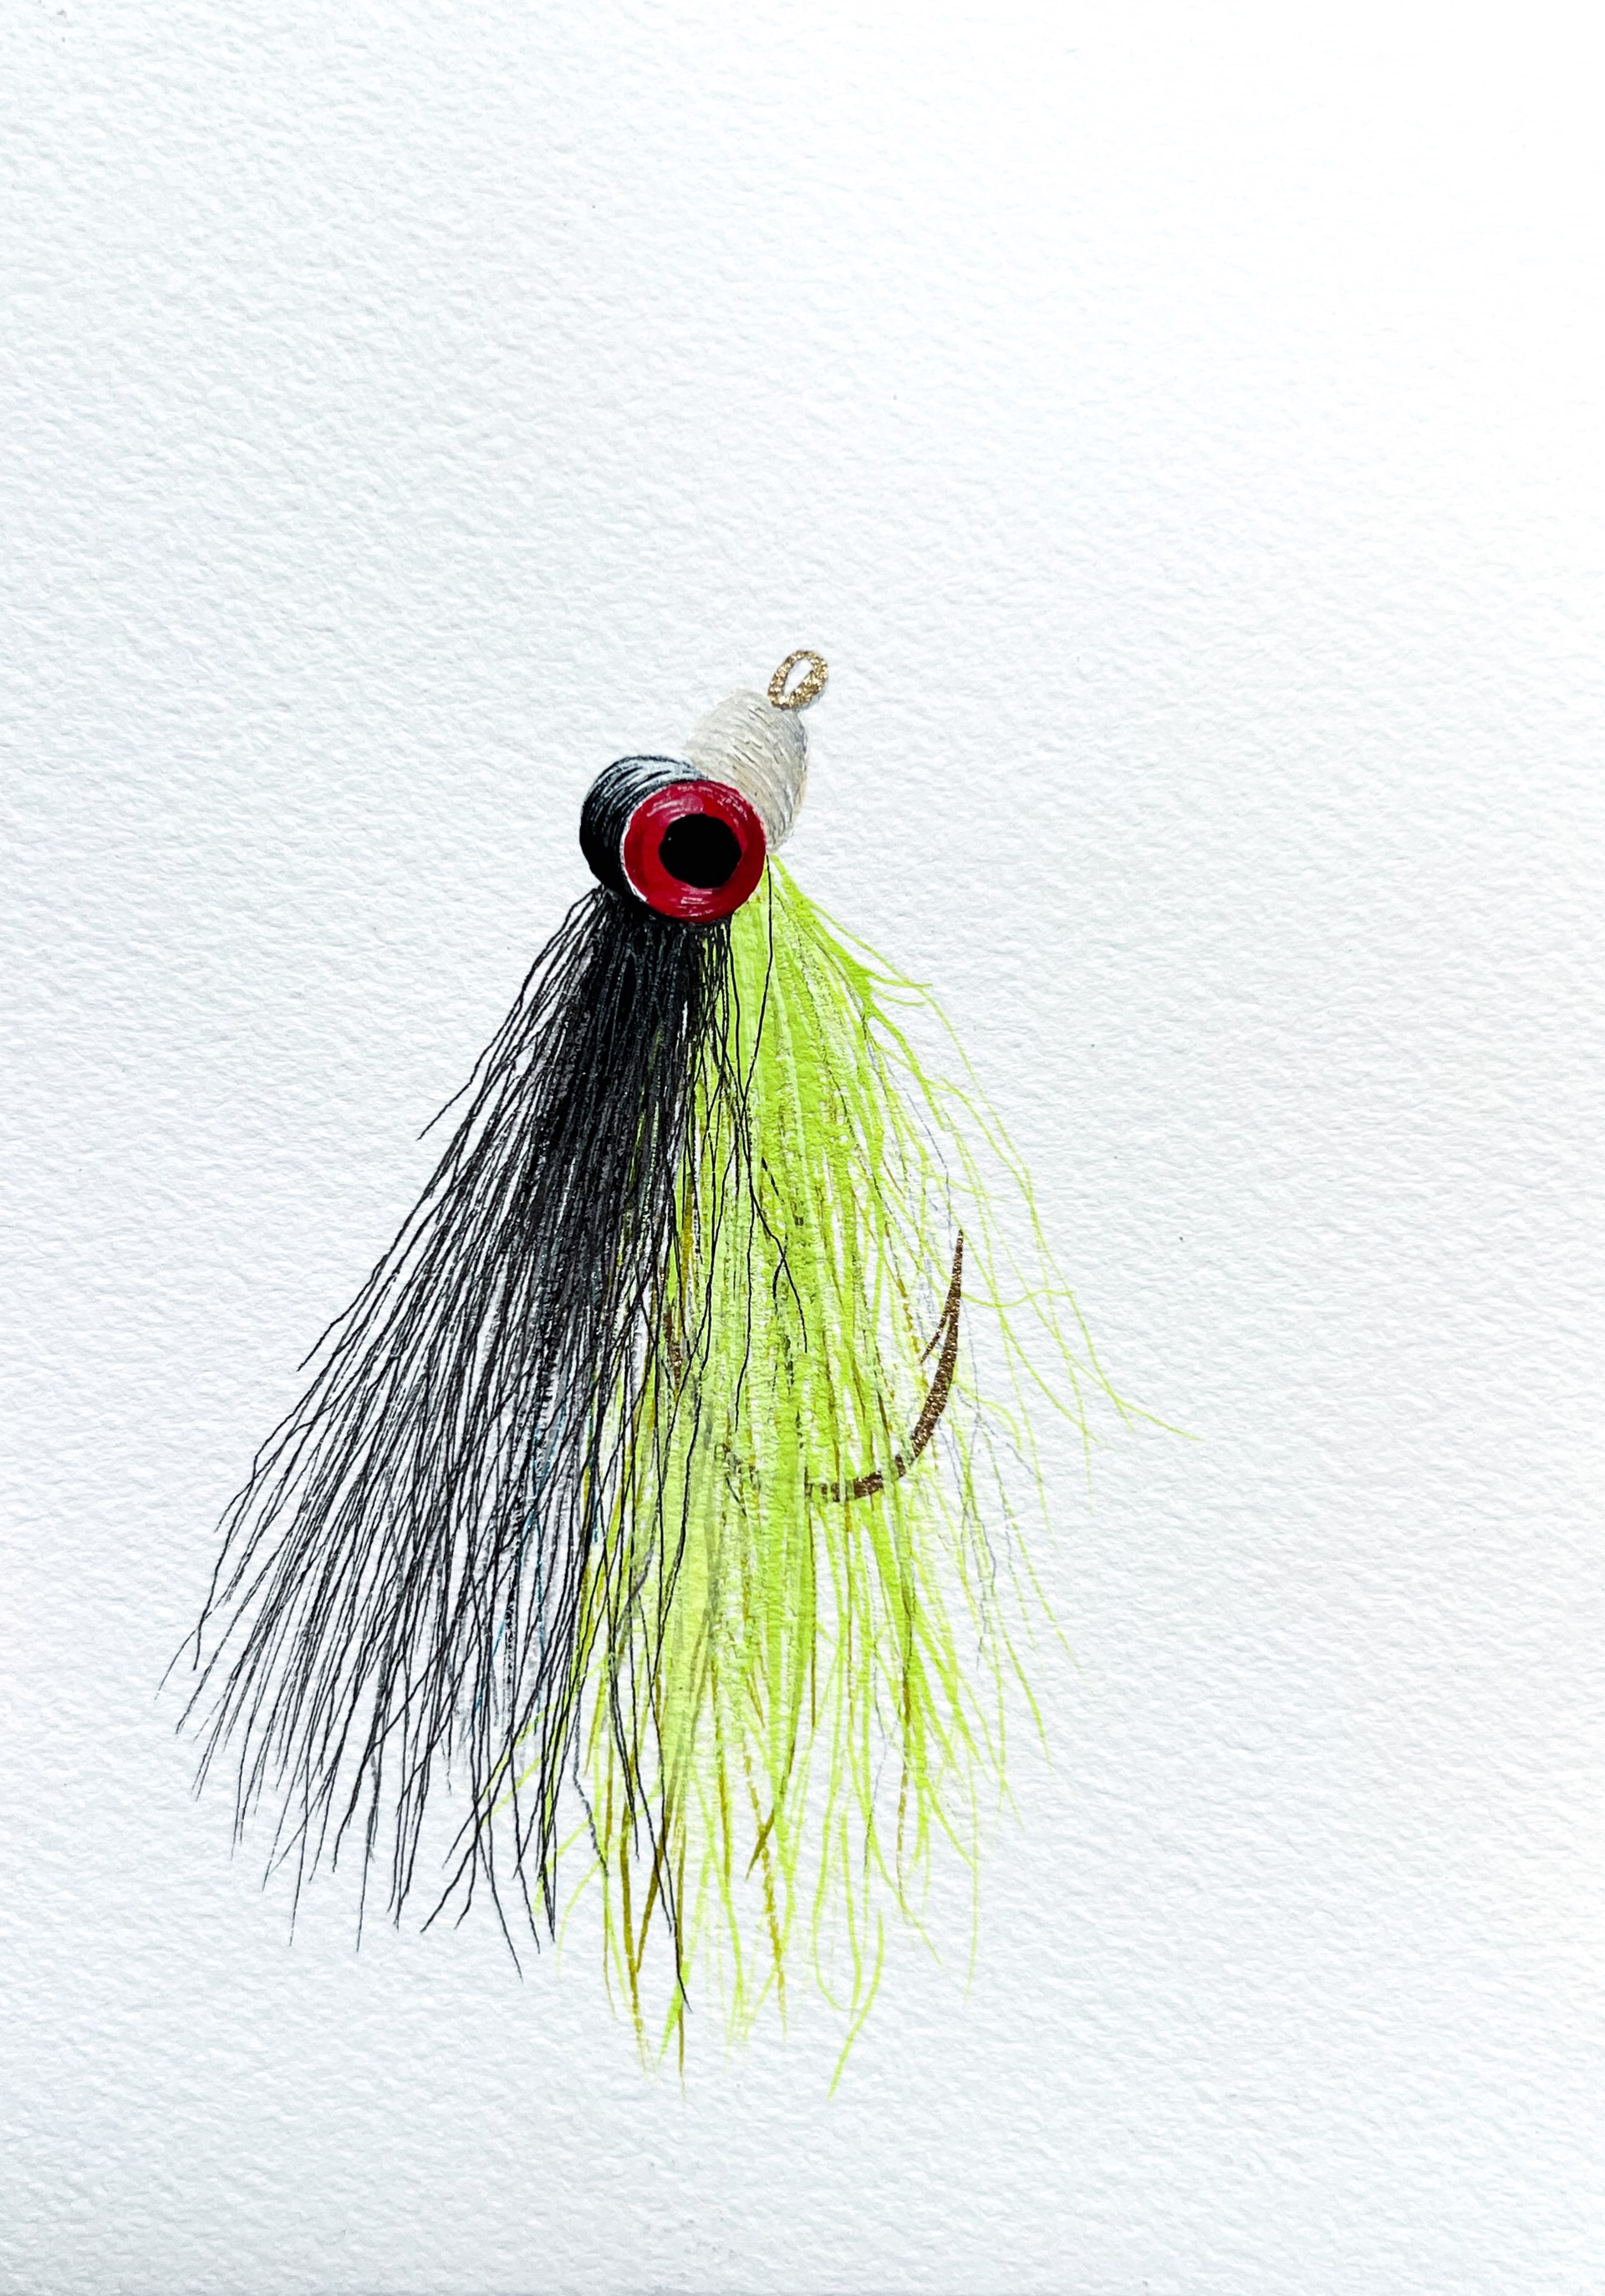 Clouser Minnow by Meredith Mejerle